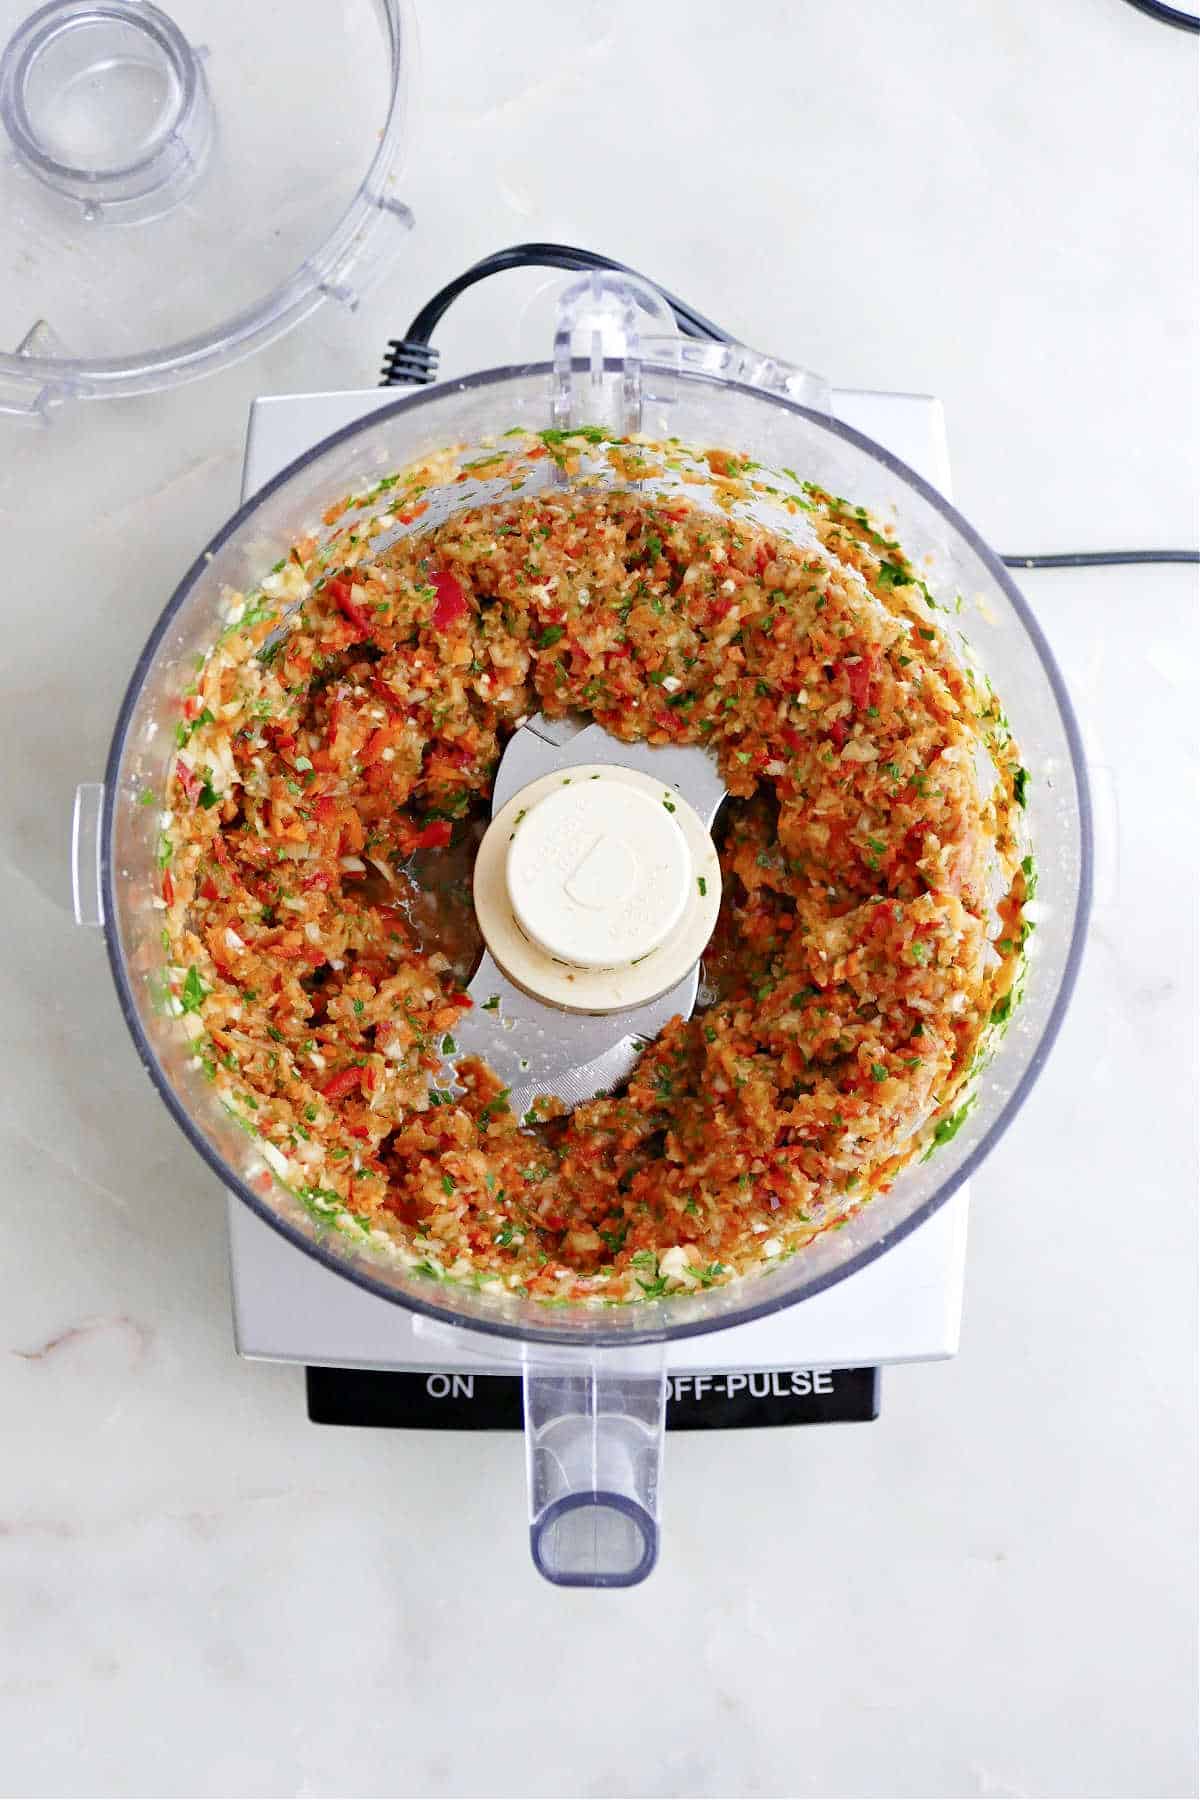 finely chopped vegetables and herbs in a food processor on a counter